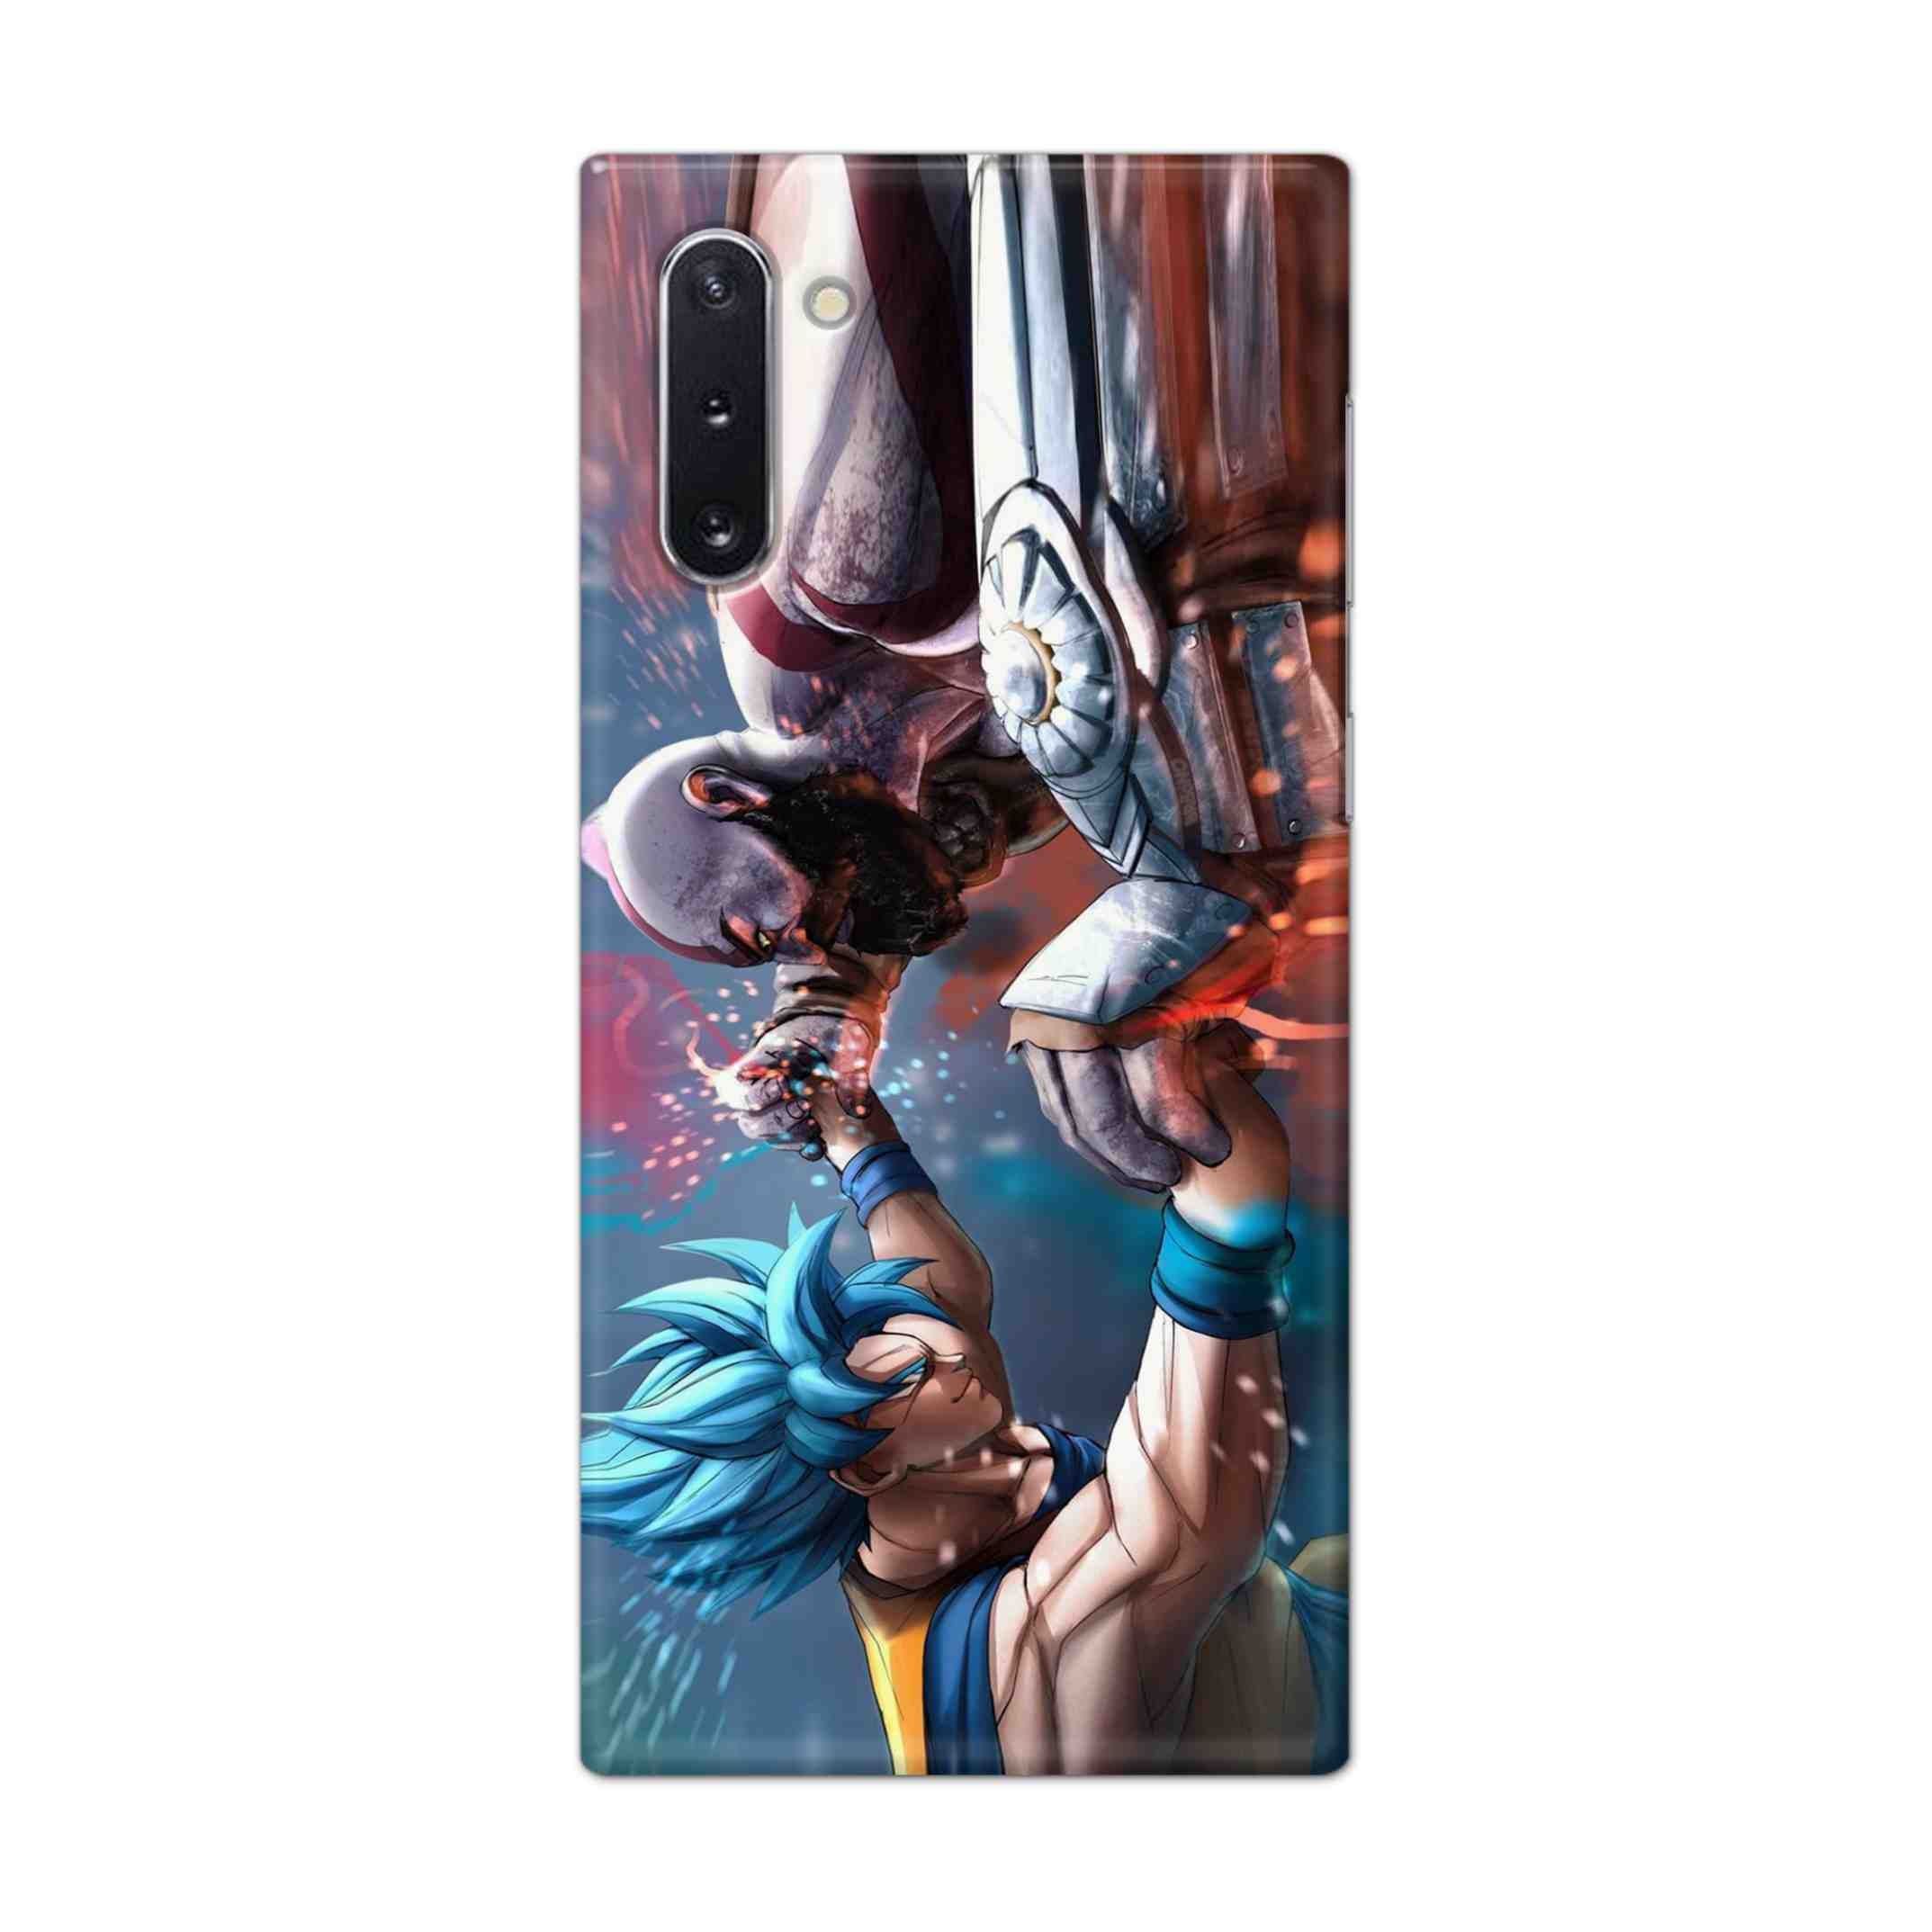 Buy Goku Vs Kratos Hard Back Mobile Phone Case Cover For Samsung Galaxy Note 10 Online